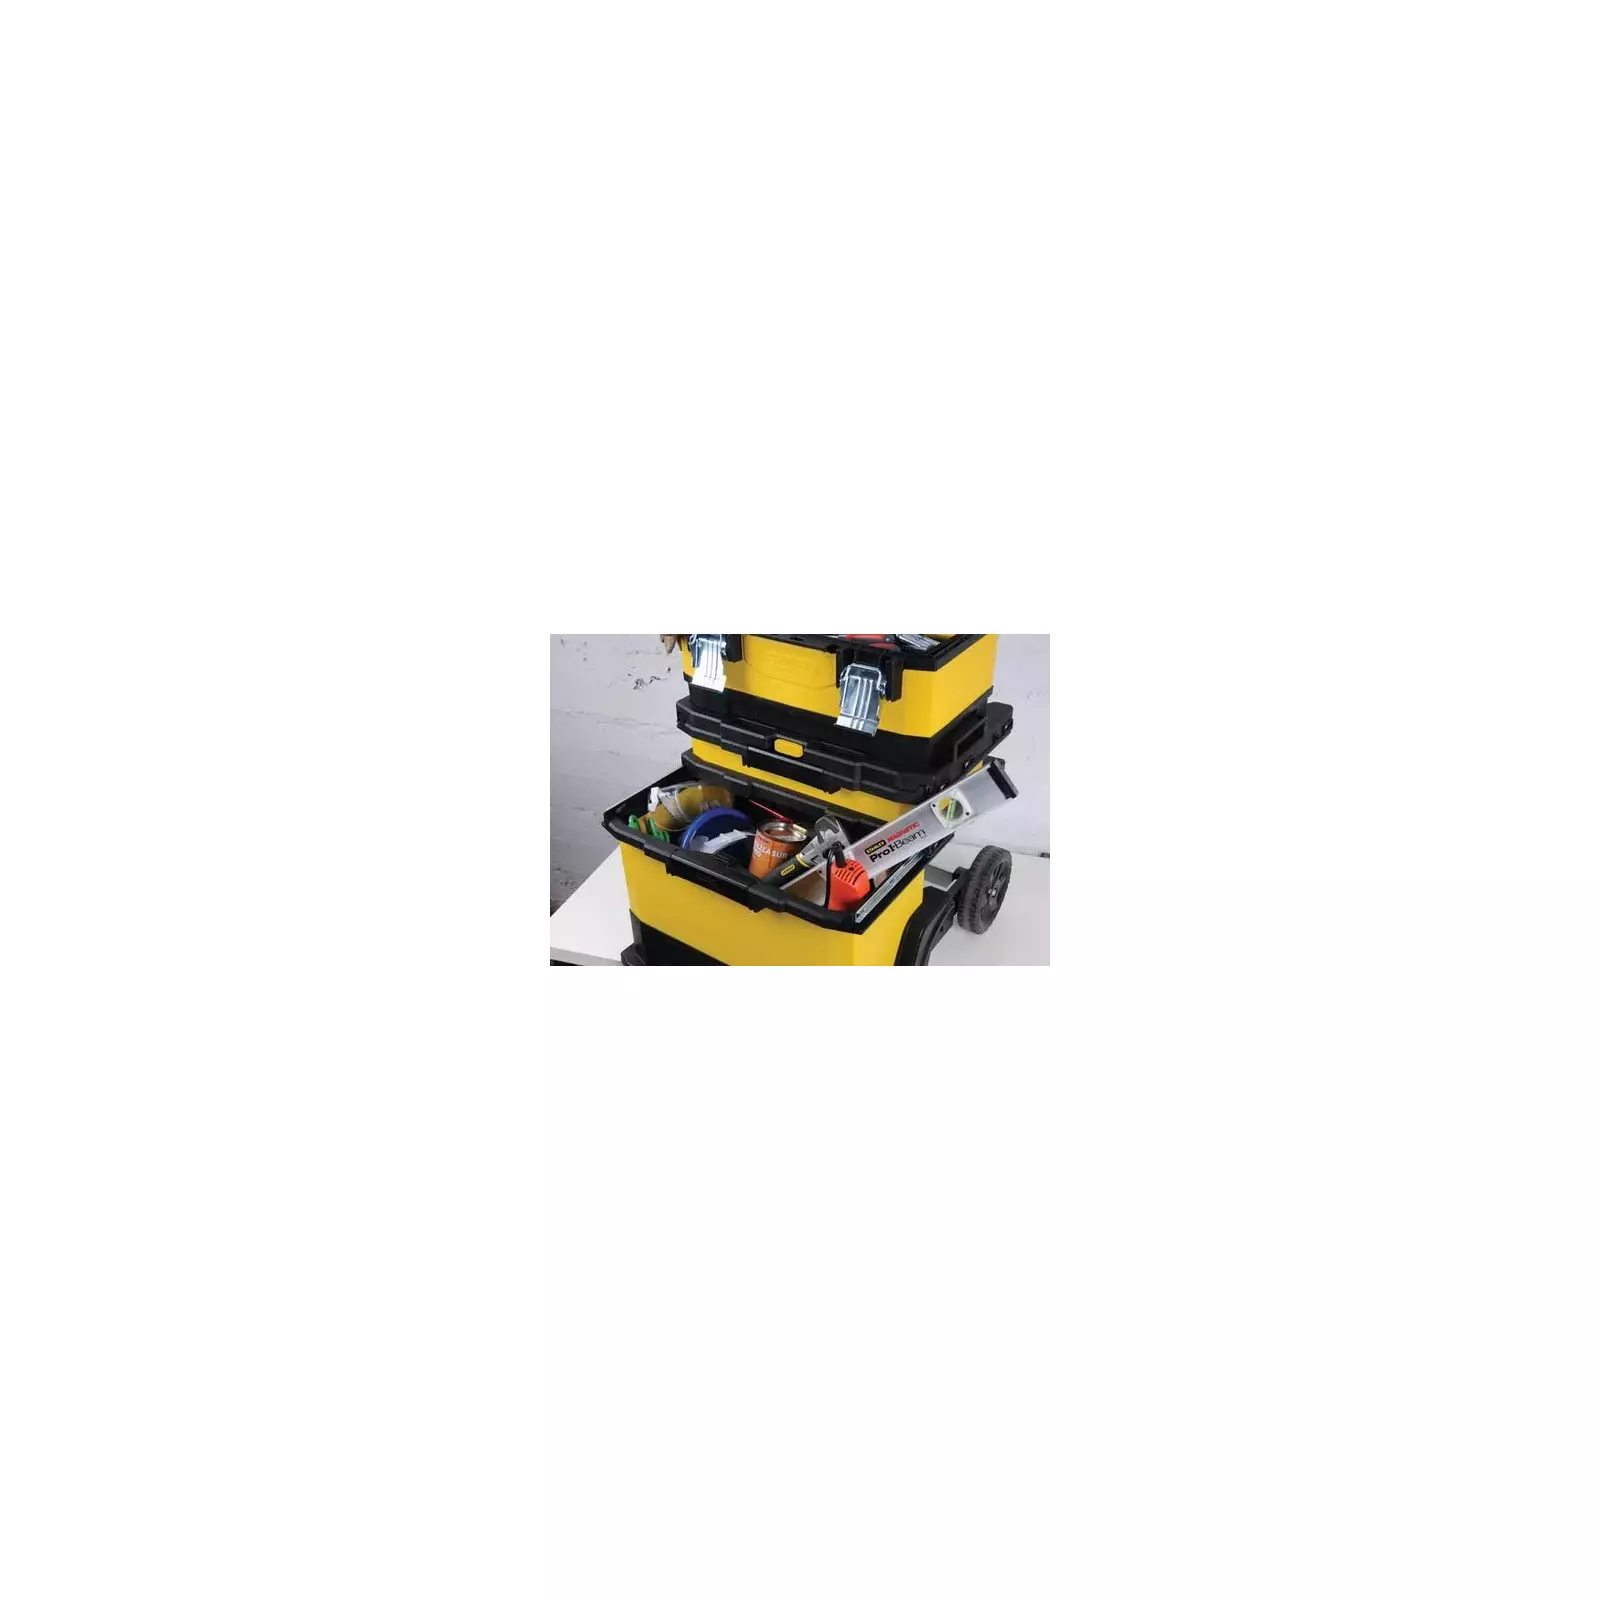 Stanley 1-95-621 small parts/tool box 1-95-621